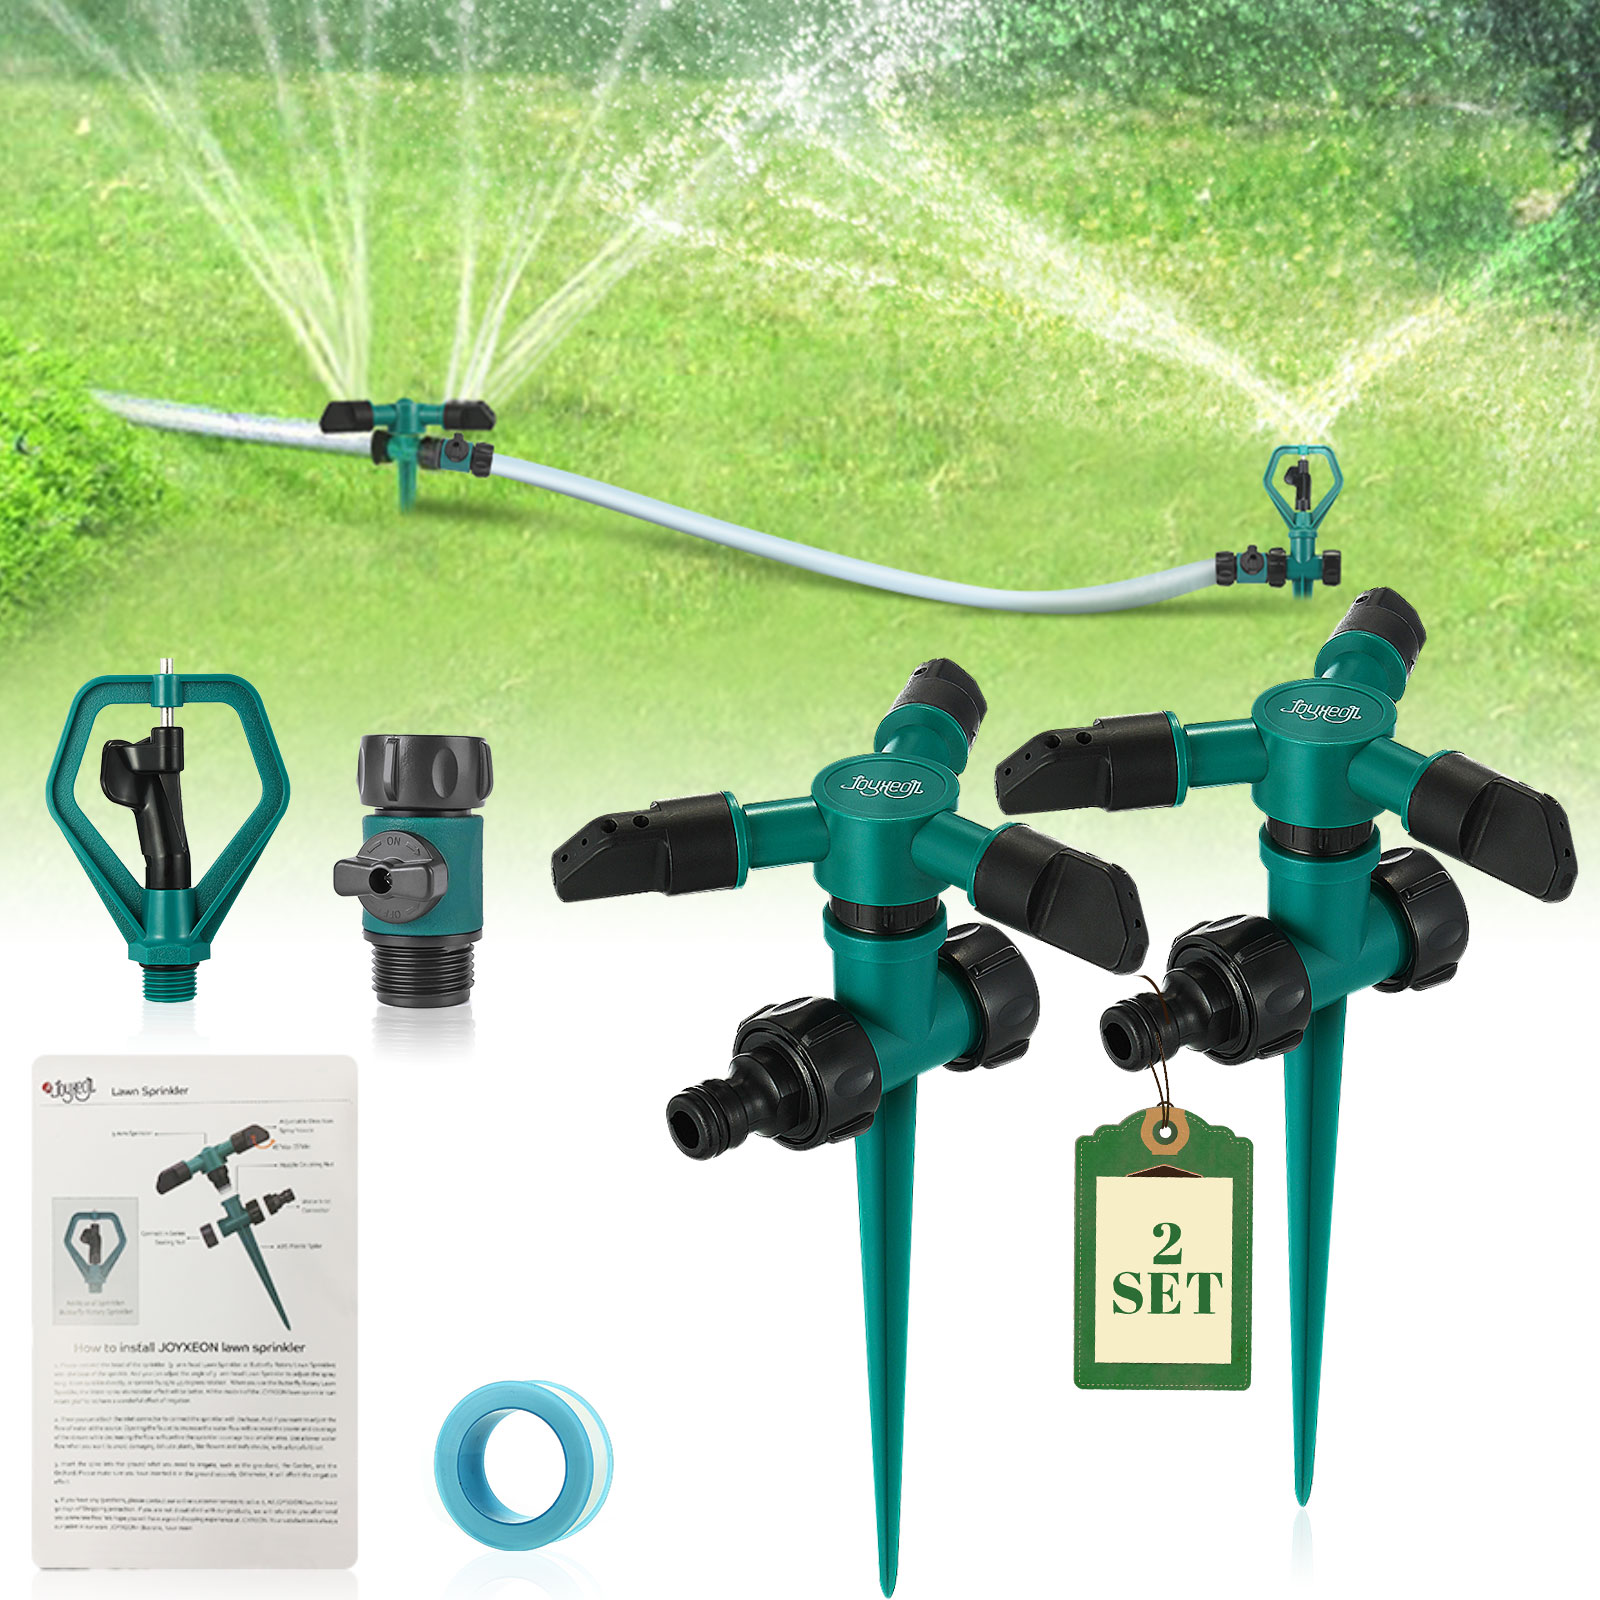 JOYXEON 3-head 360 Angles Rotating Sprinkler With Support Rod Garden Lawn Automatic Irrigation Watering Systems Sprinkler